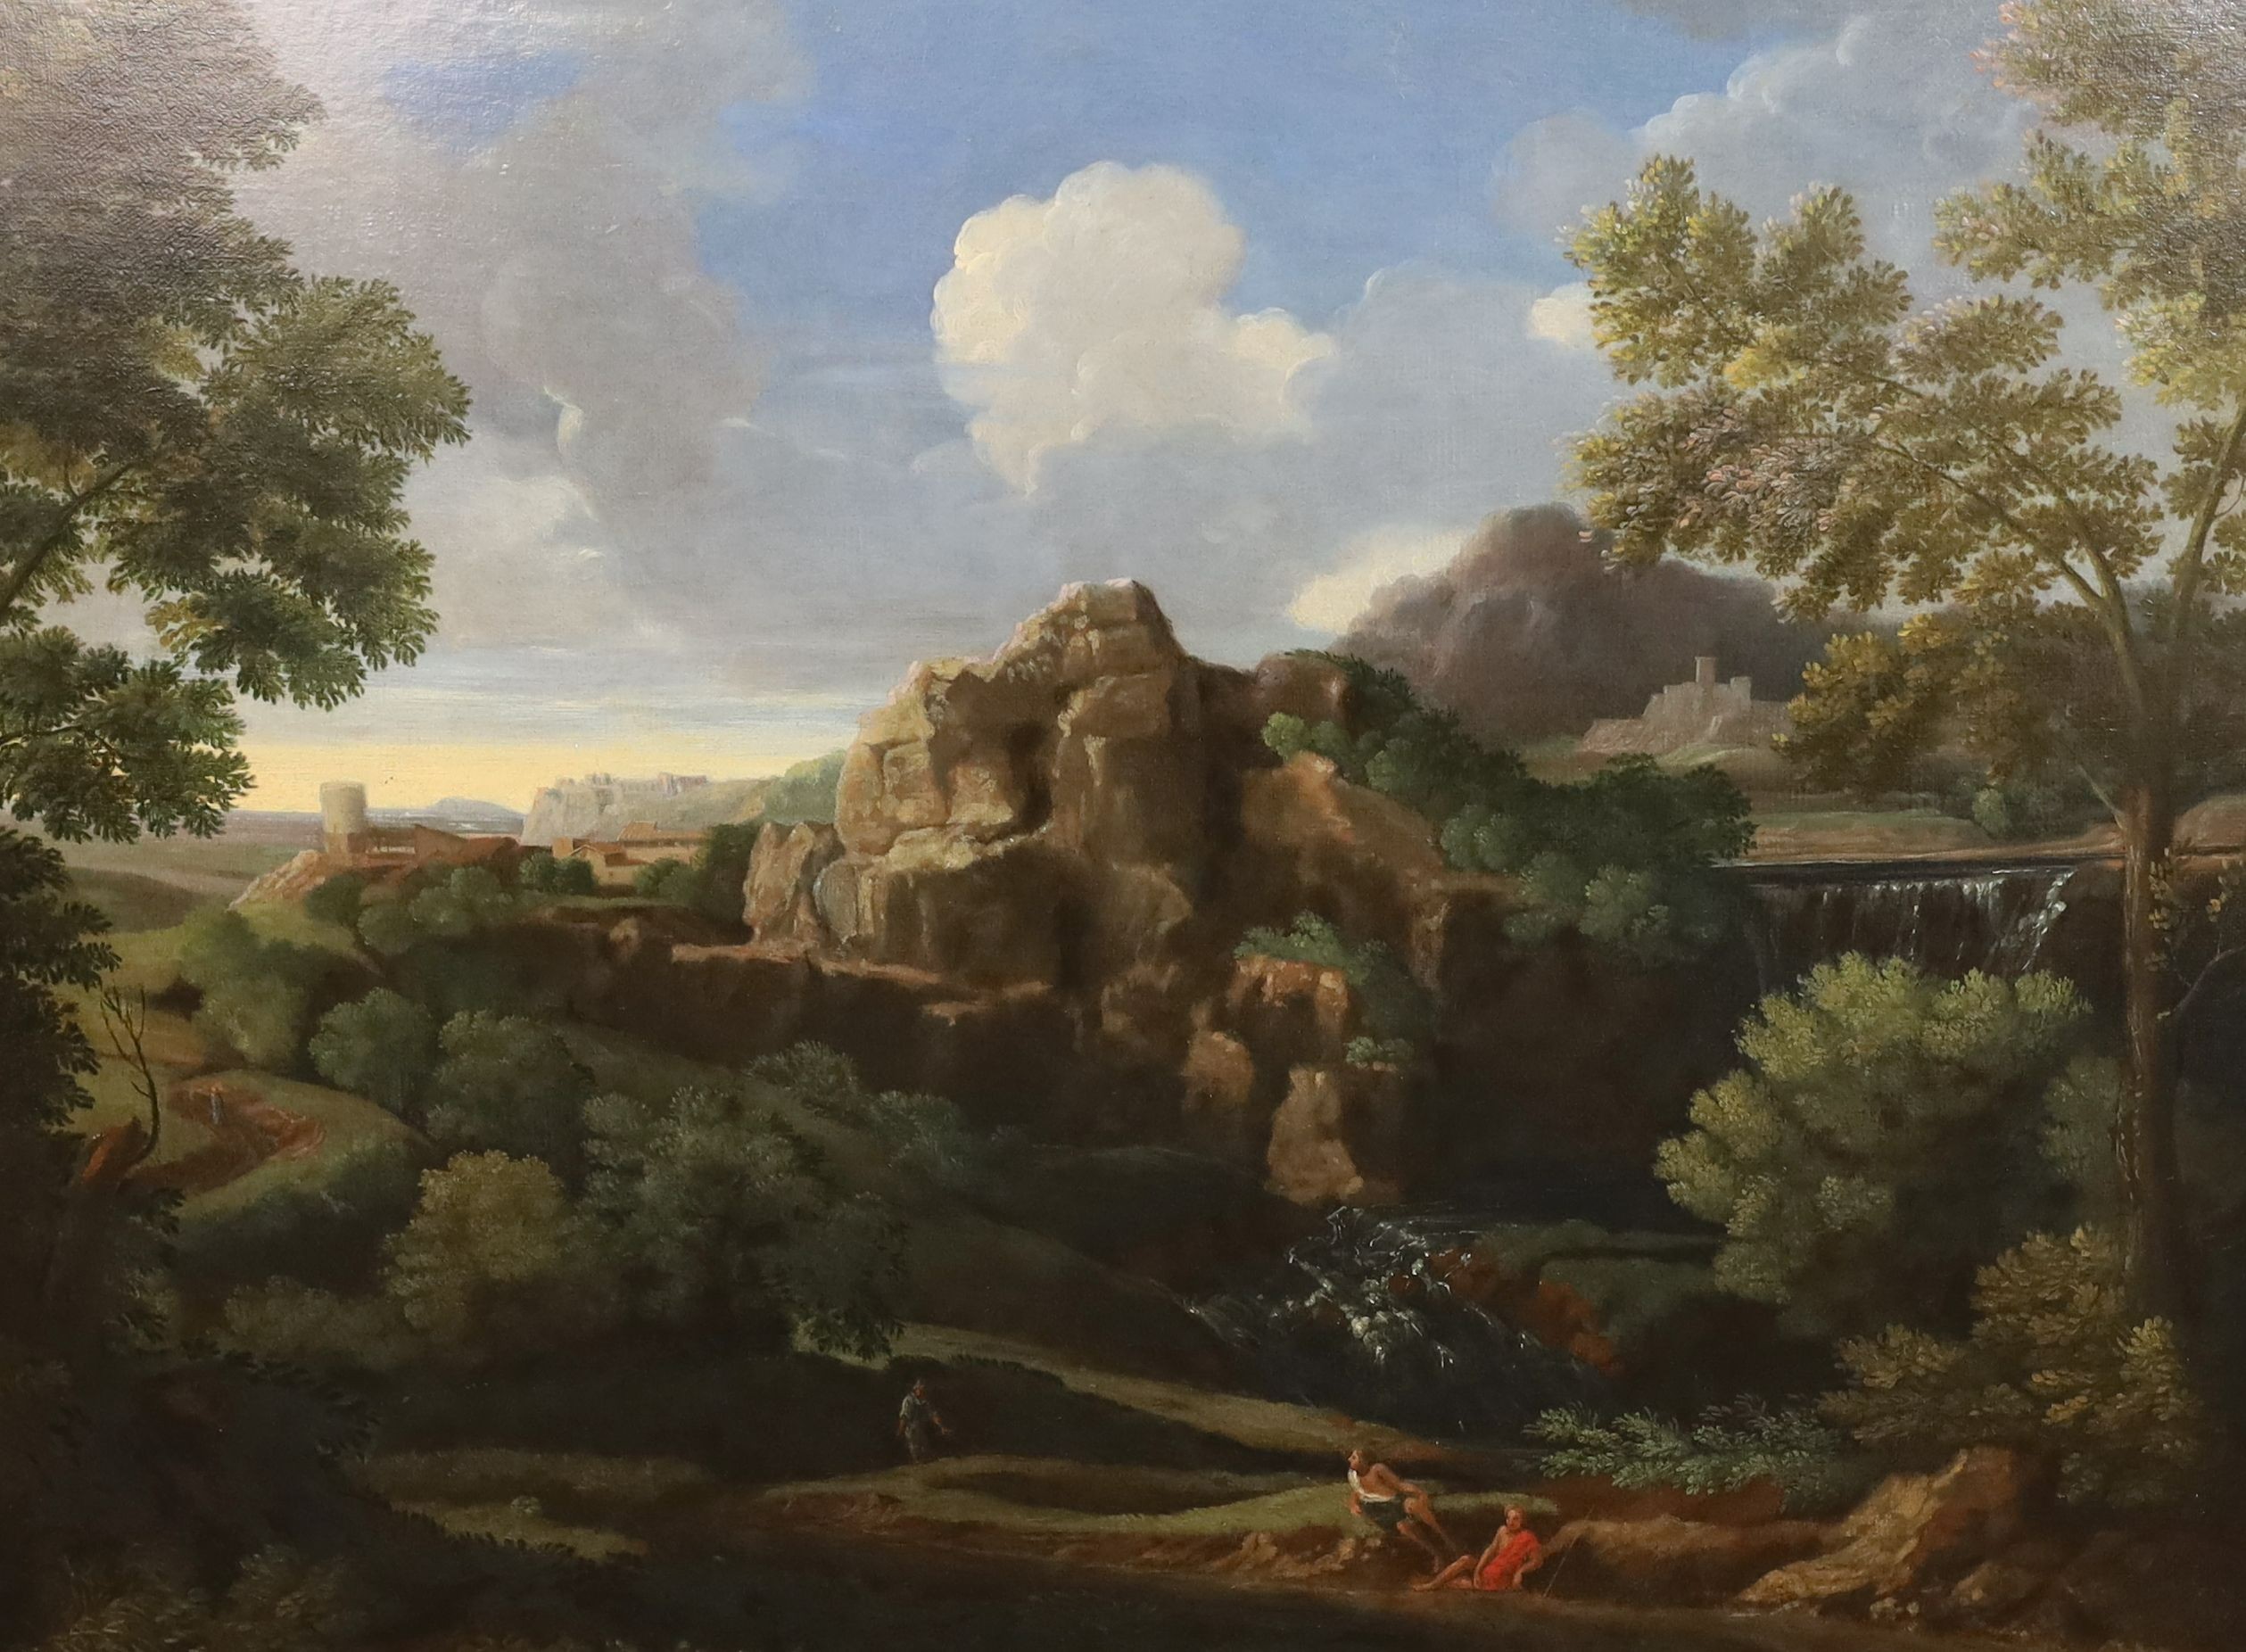 Circle of Nicolas Poussin (French, 1594-1665), Figures in an Italianate landscape, oil on canvas, 72 x 96cm